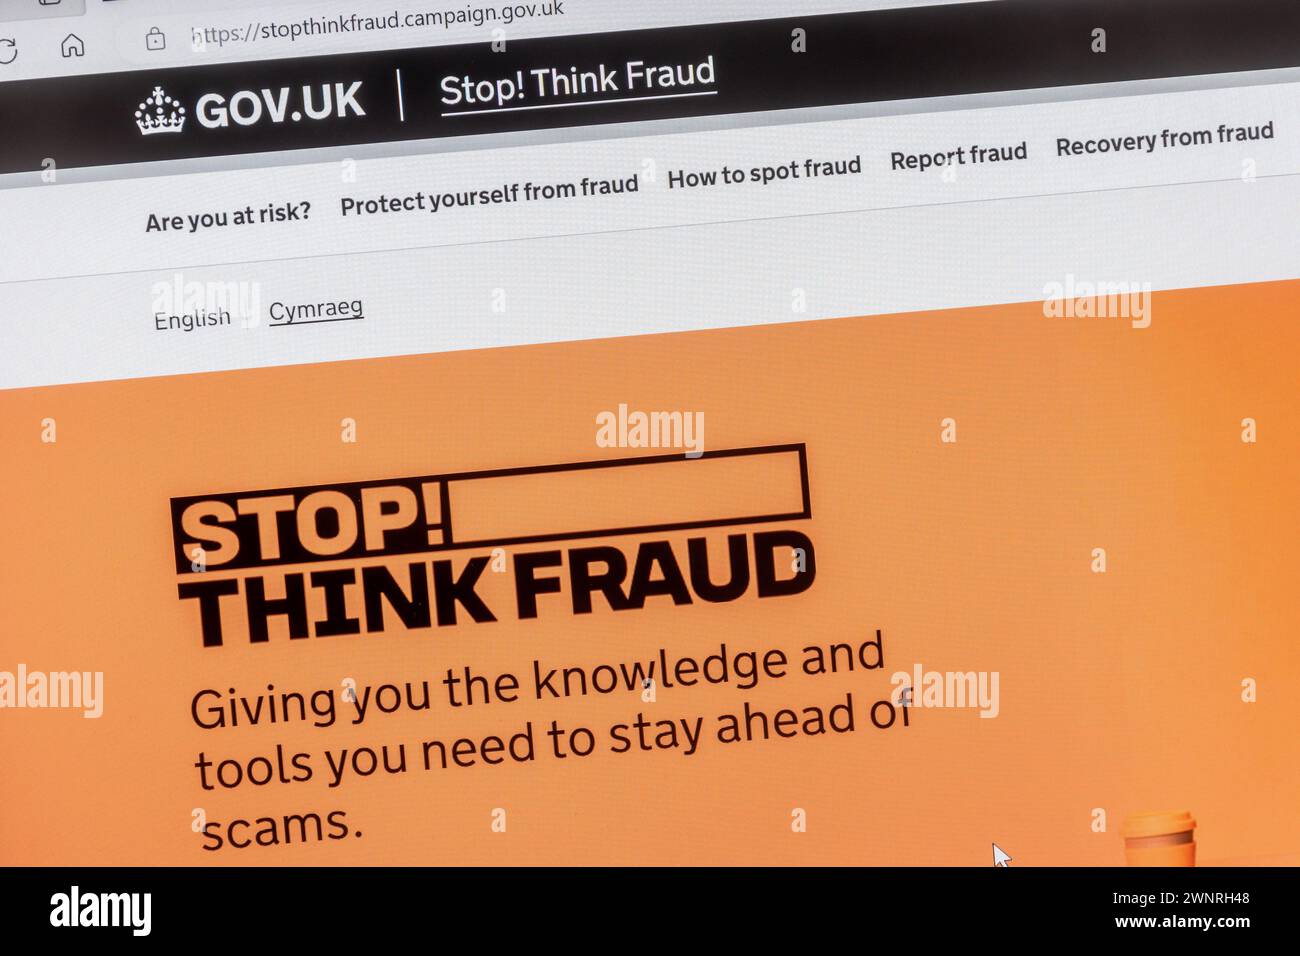 Stop Think Fraud web page, government information or advice on Gov.uk website about how to spot fraudsters and protect yourself Stock Photo